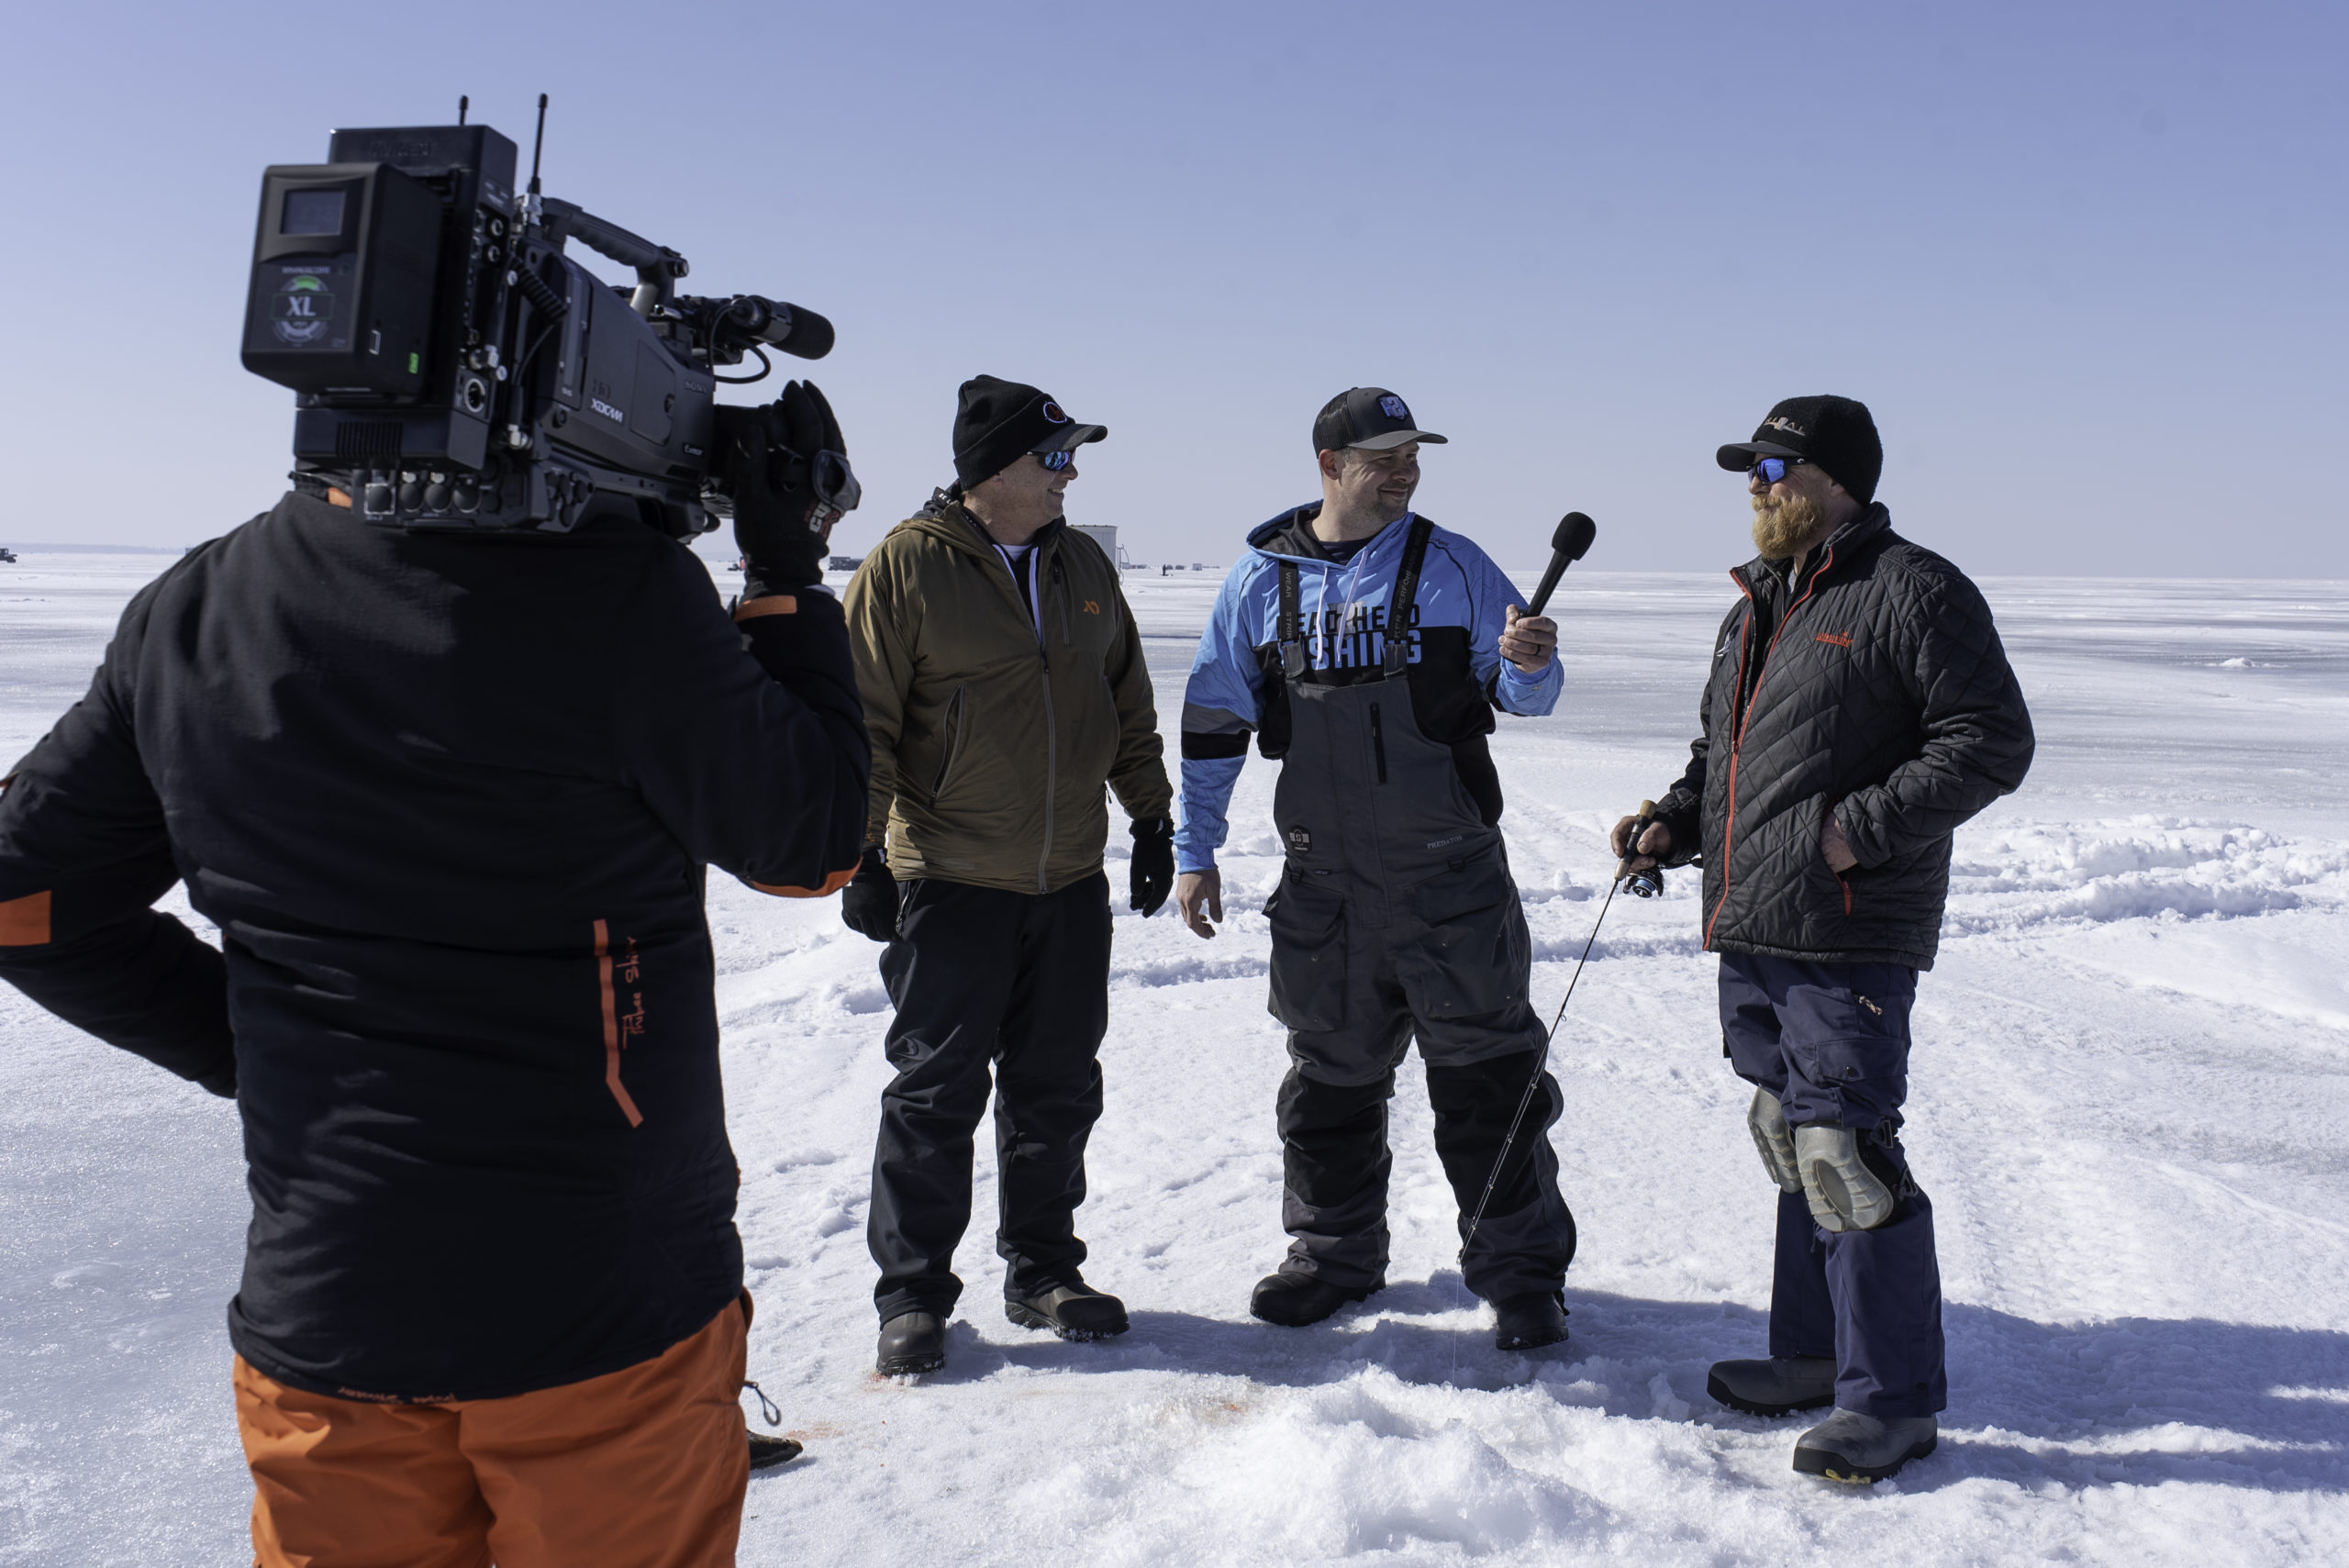 PWS interviews anglers on the ice